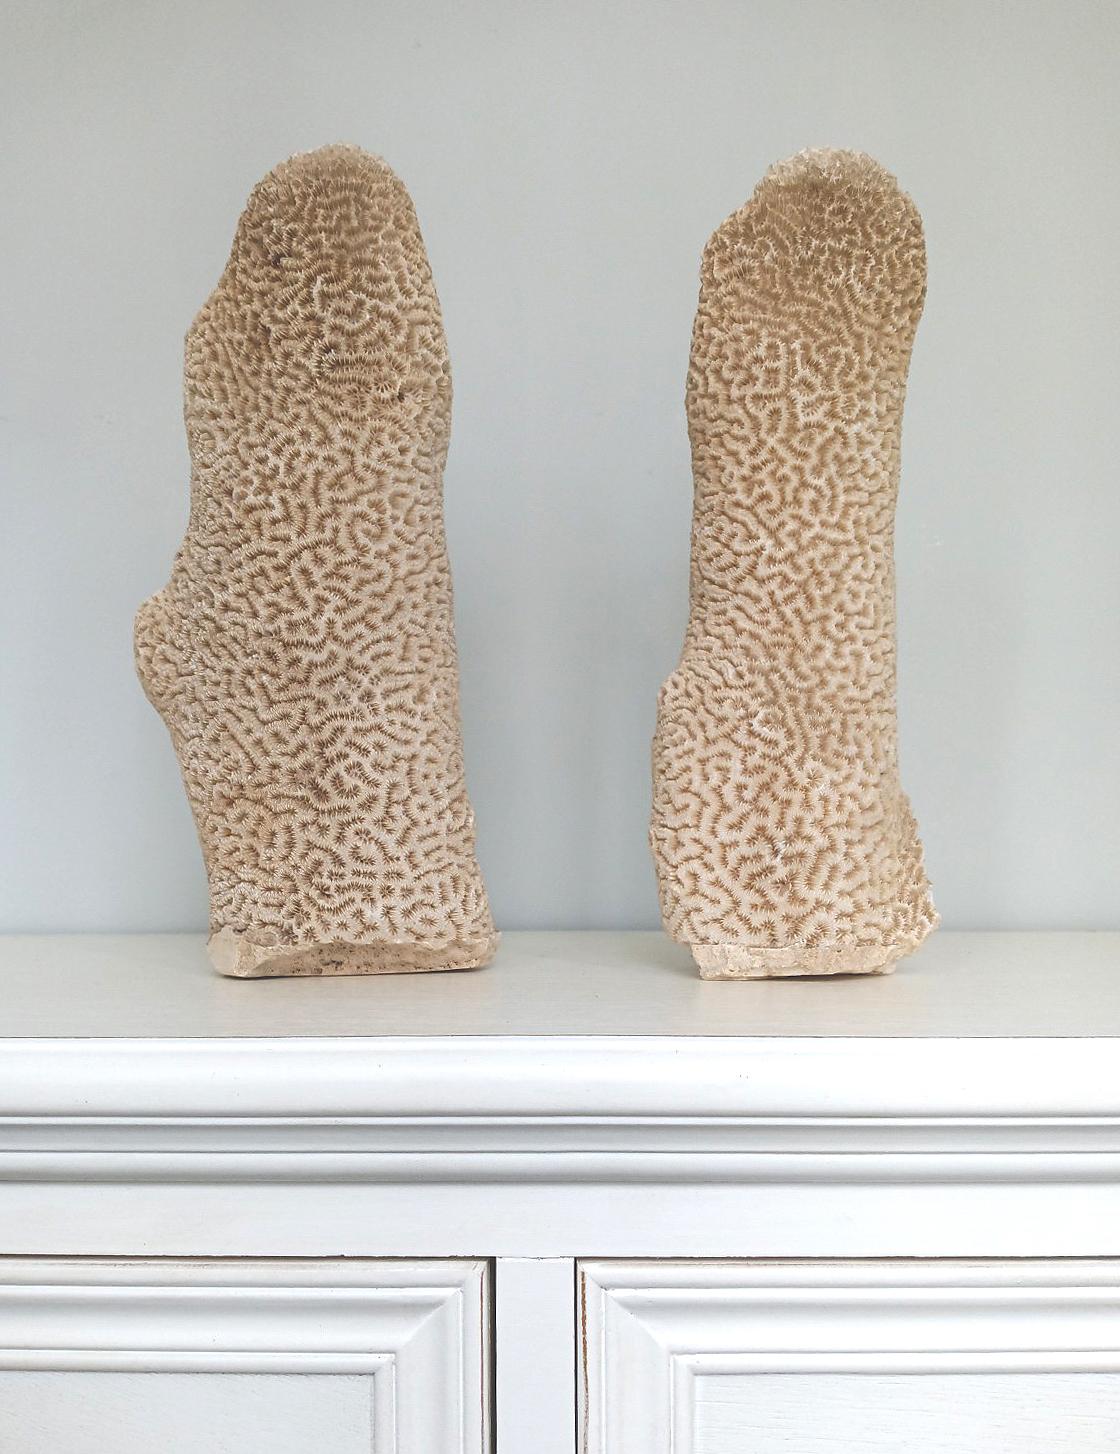 A unique pair of natural standing brain coral obelisks. The bases smoothed for display. The largest of the two specimen is approximately 29 x 11.5 cm.